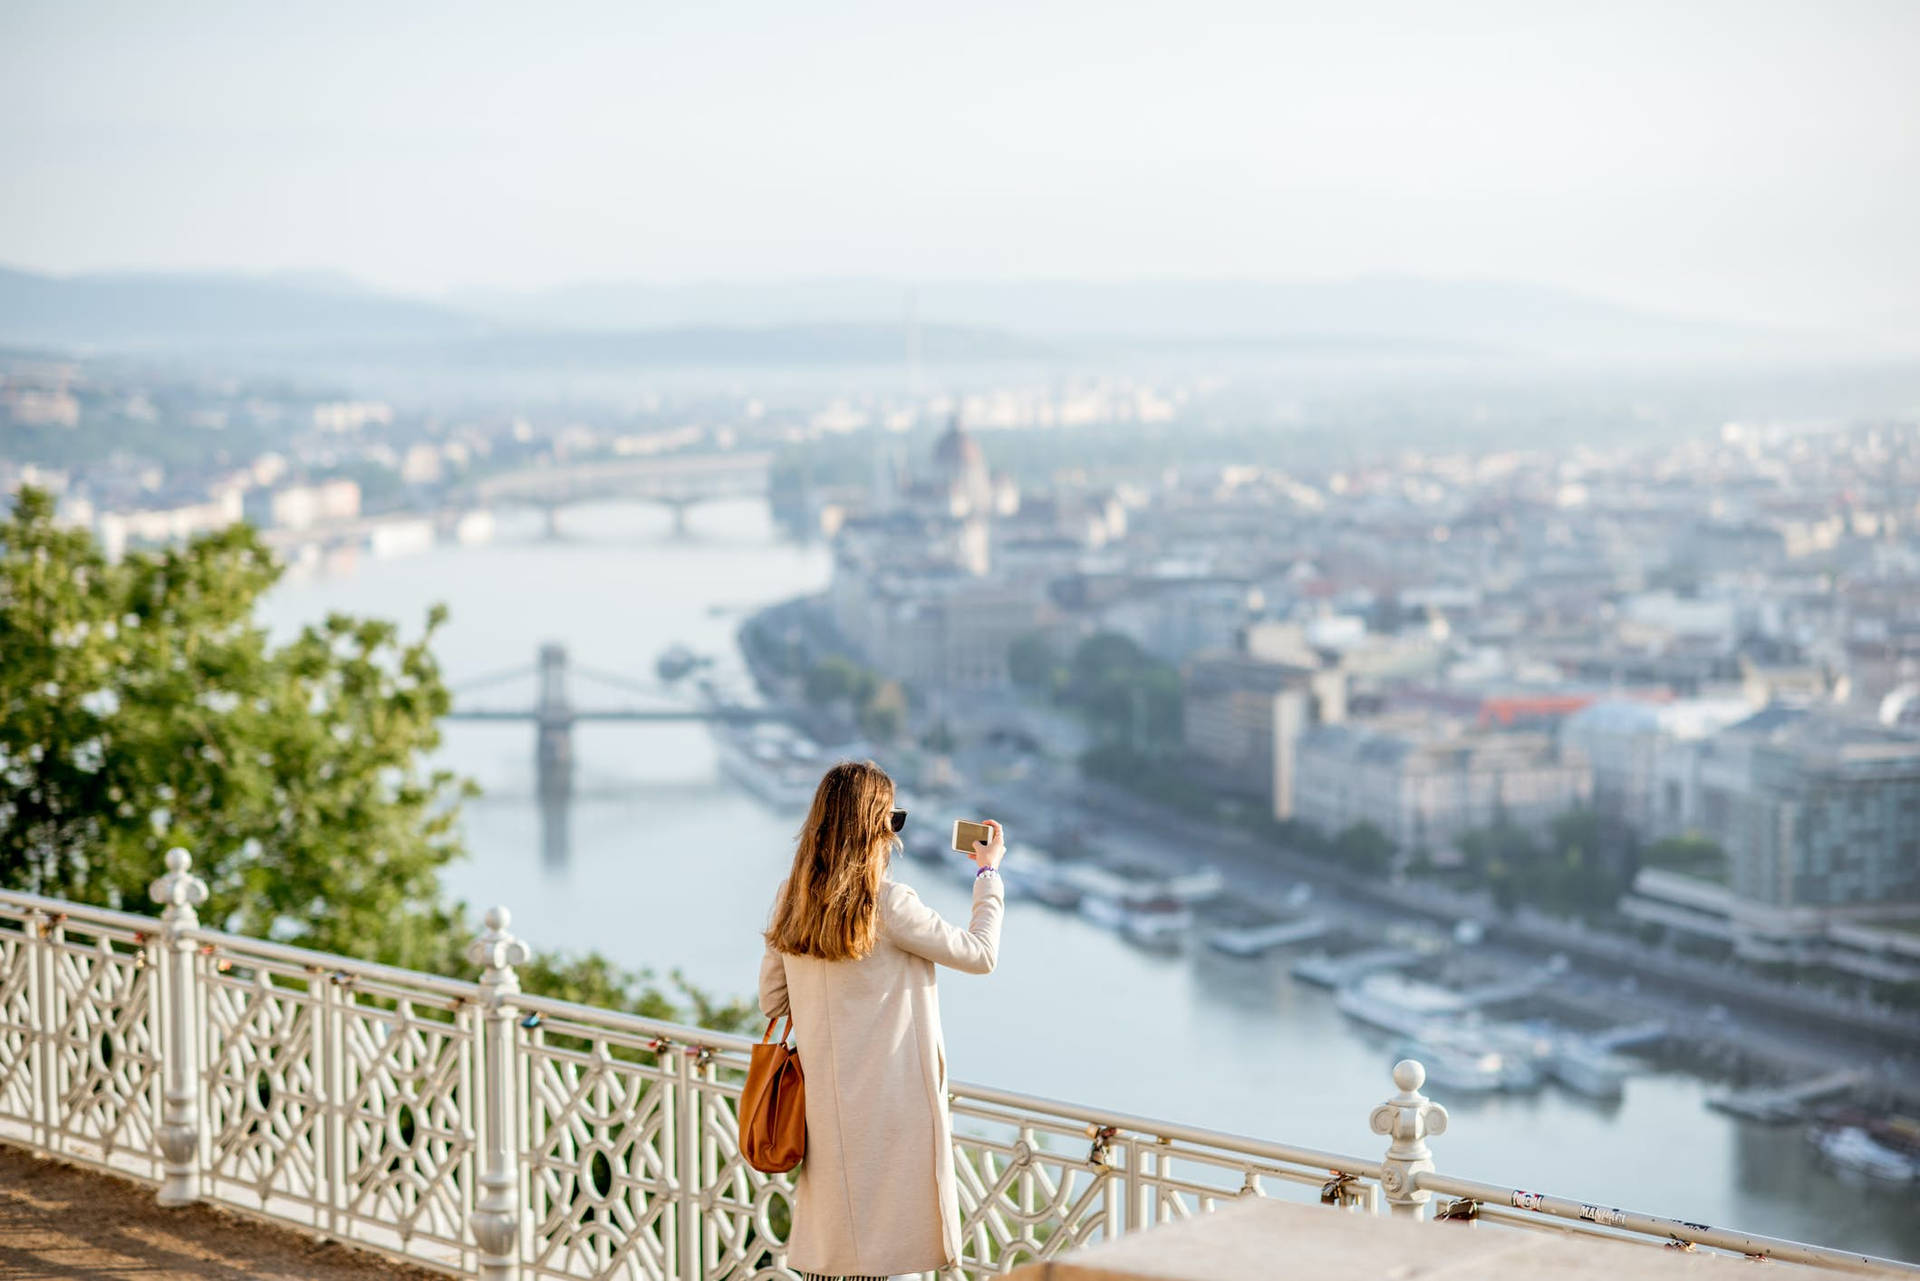 a woman is standing on a balcony overlooking the river danube Wallpaper